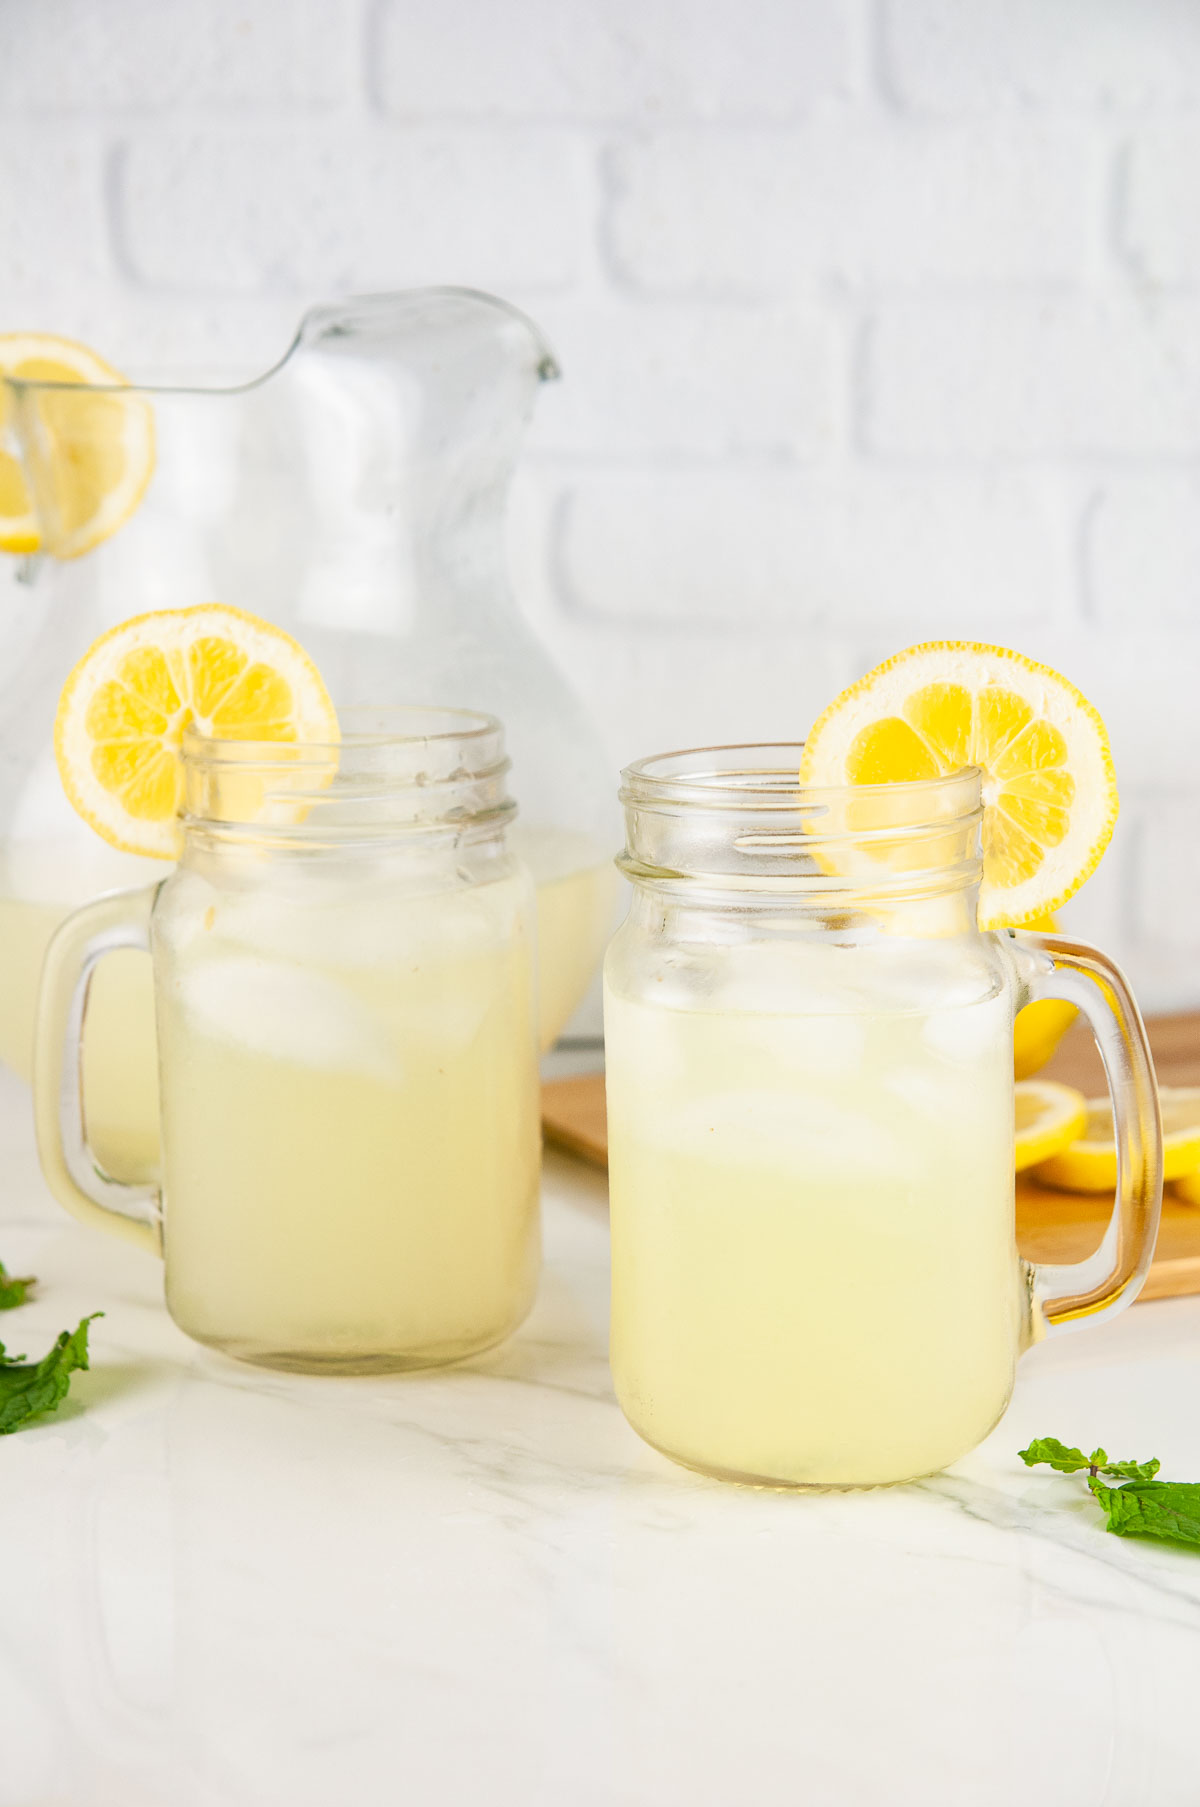 This easy alcoholic lemonade cocktail recipe uses the classic summer drink to make an adult, boozy beverage. You'll be sipping this spiked lemonade all summer long!